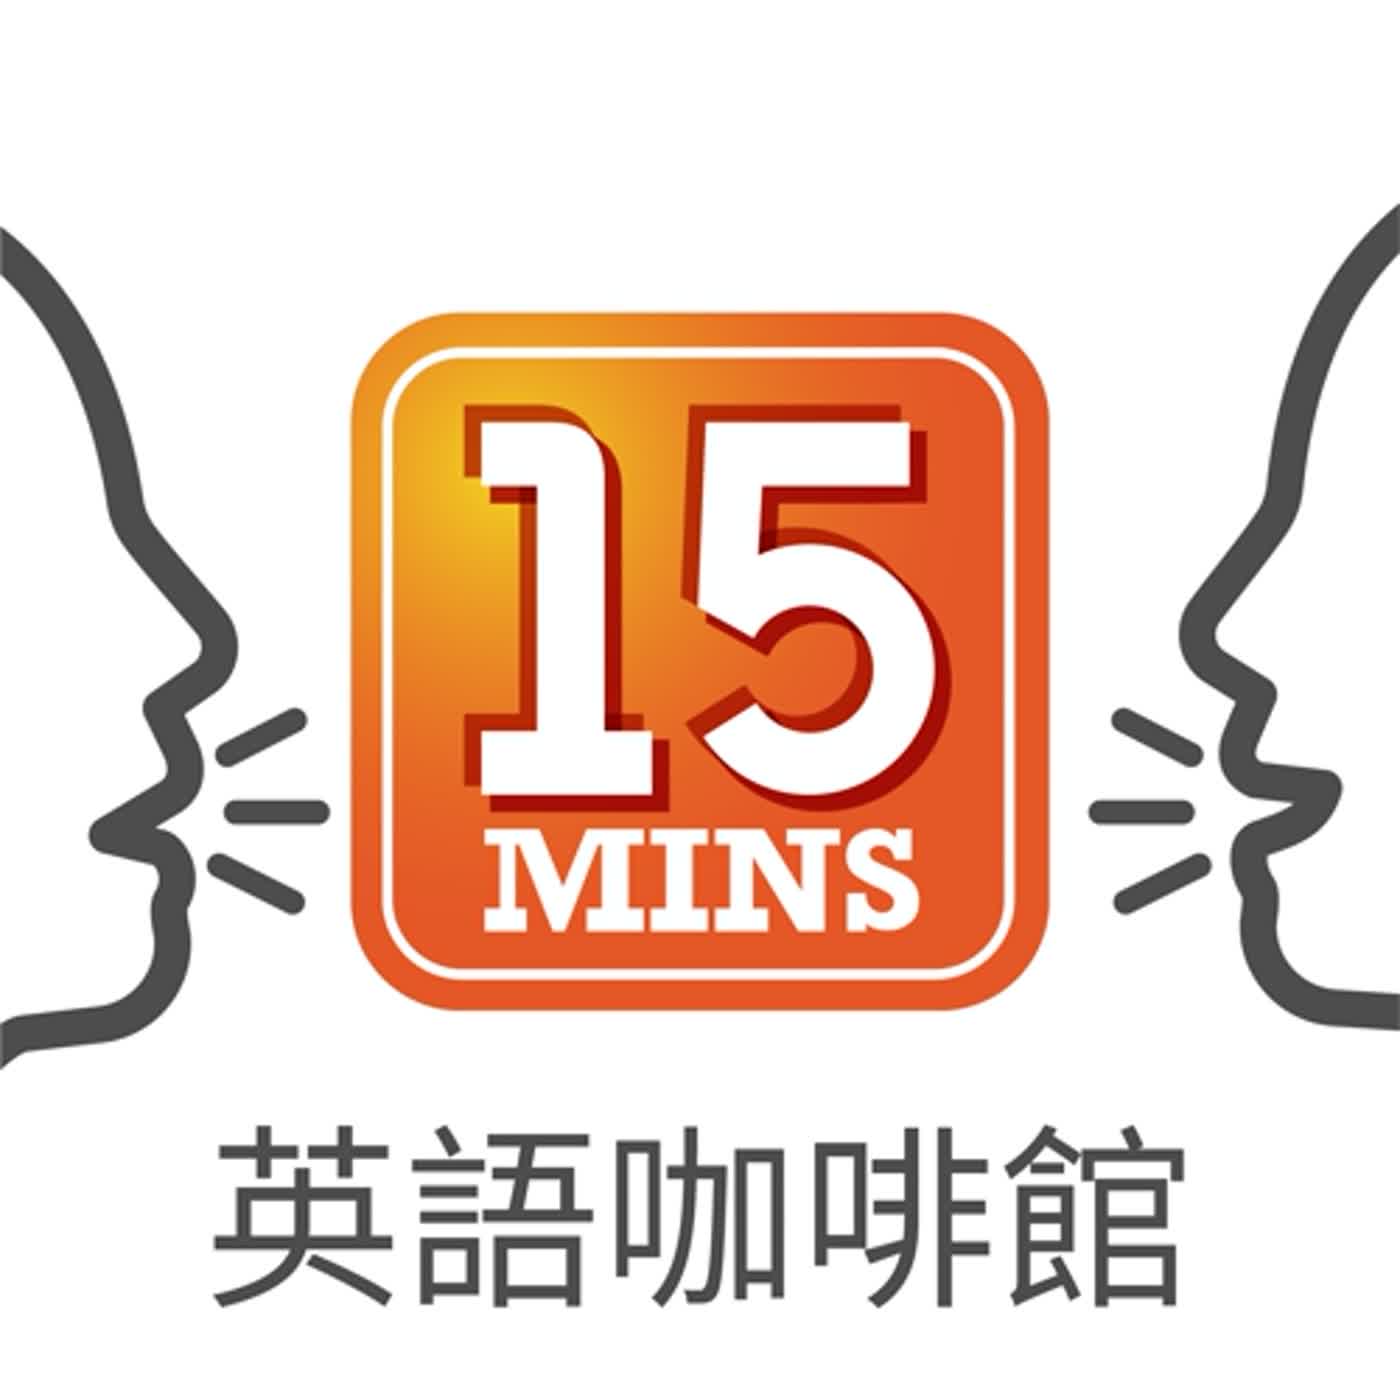 15Mins英語咖啡館 Ep.199 : 東西方大不同, 令人抓狂的禮儀！ Etiquette that is considered rude for the West and not the East